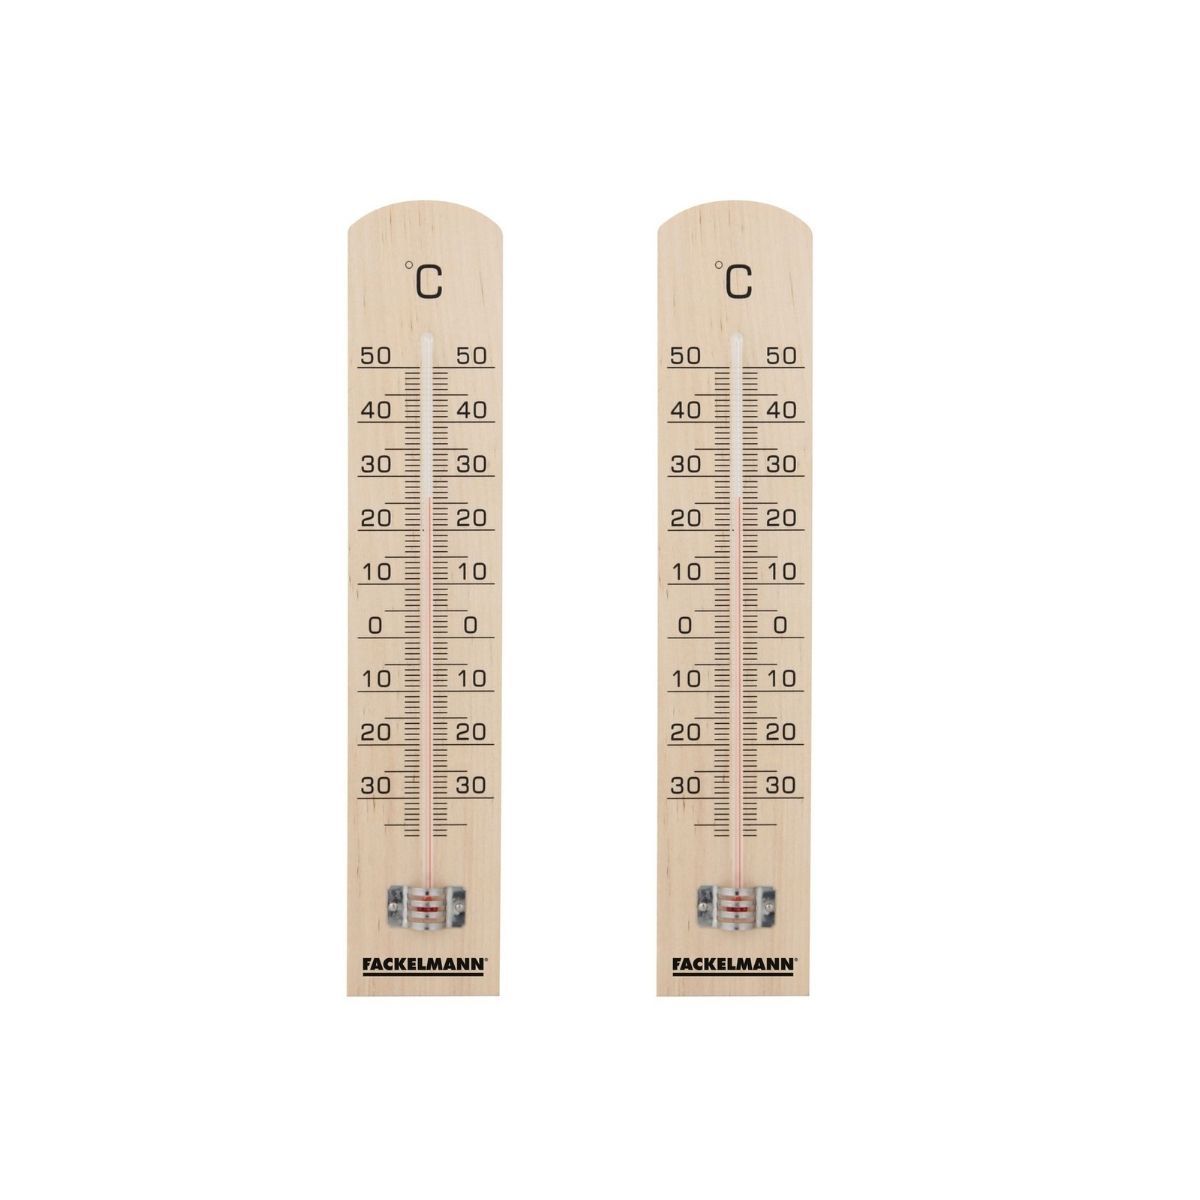 Thermometre bois - Cdiscount